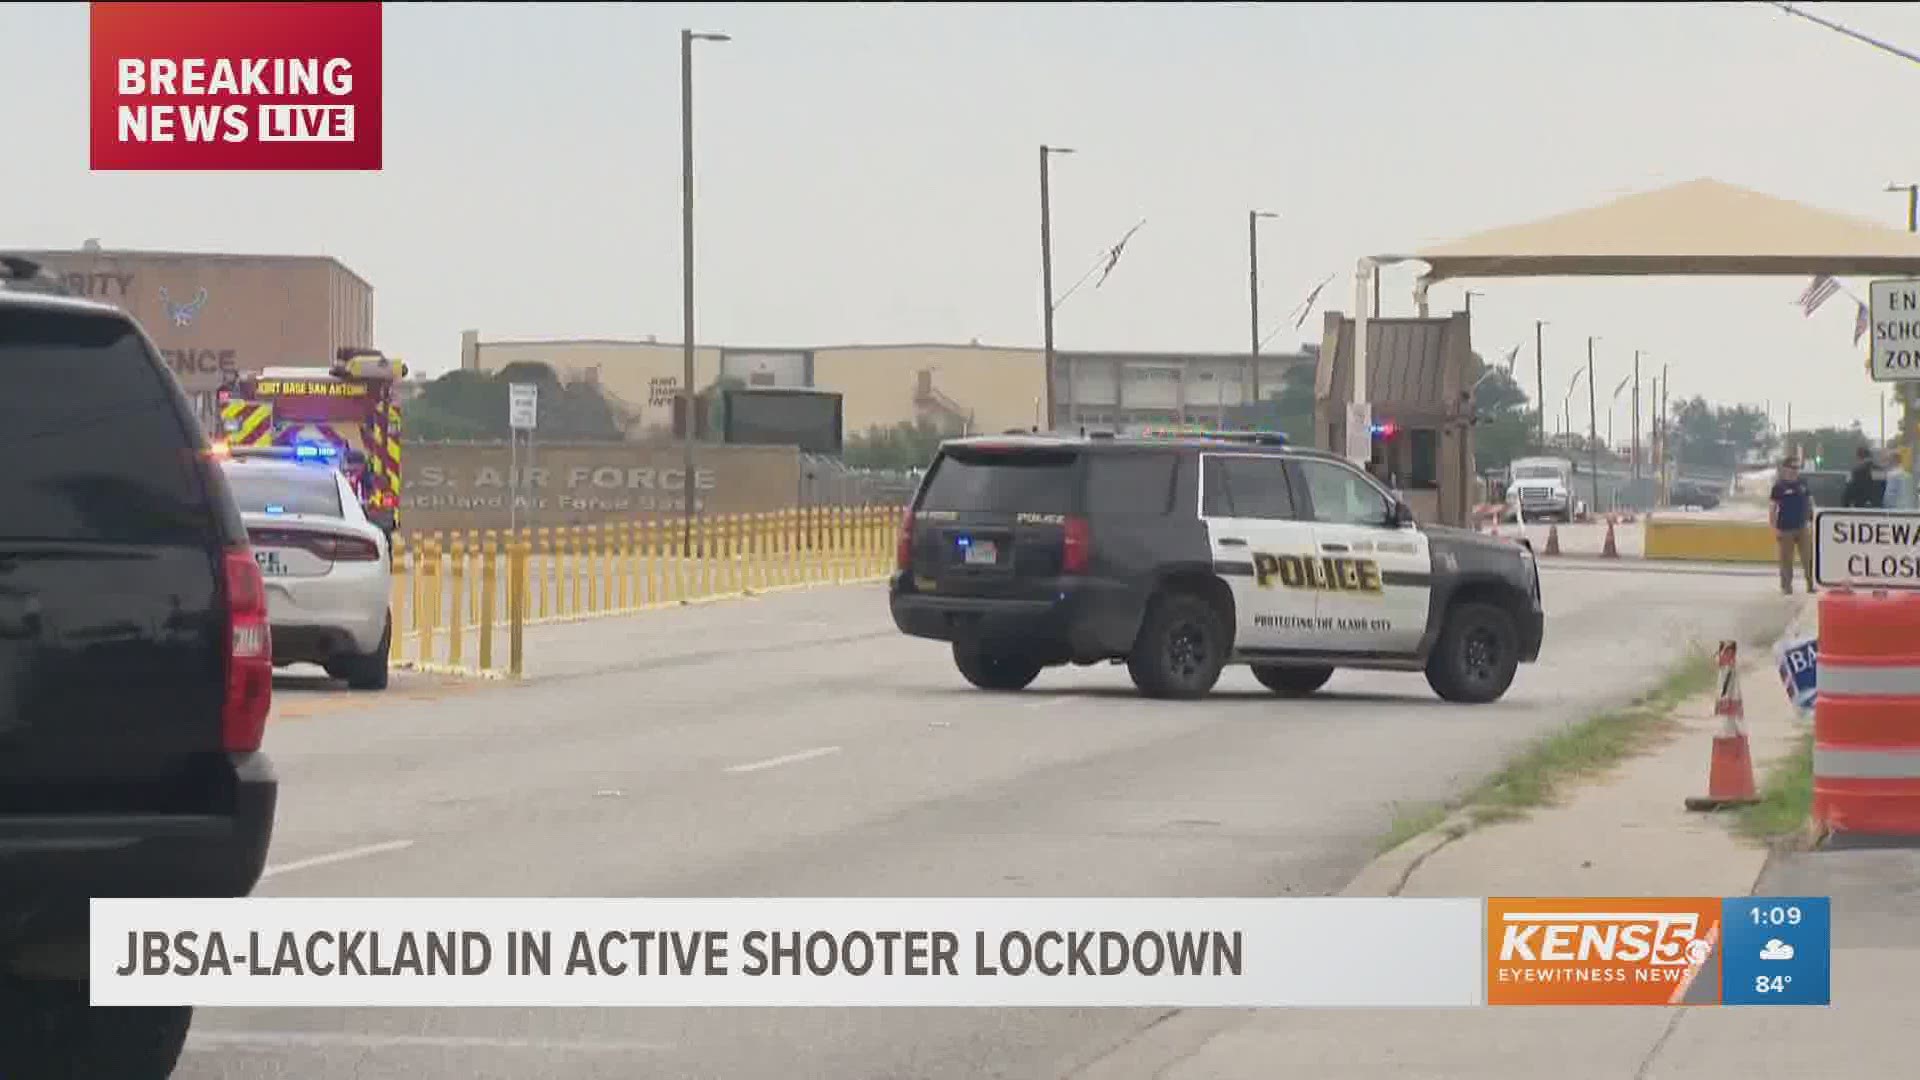 The San Antonio Police Department told KENS 5 they are handling the incident, and the Bexar County Sheriff's Office is assisting with patrolling around Lackland.